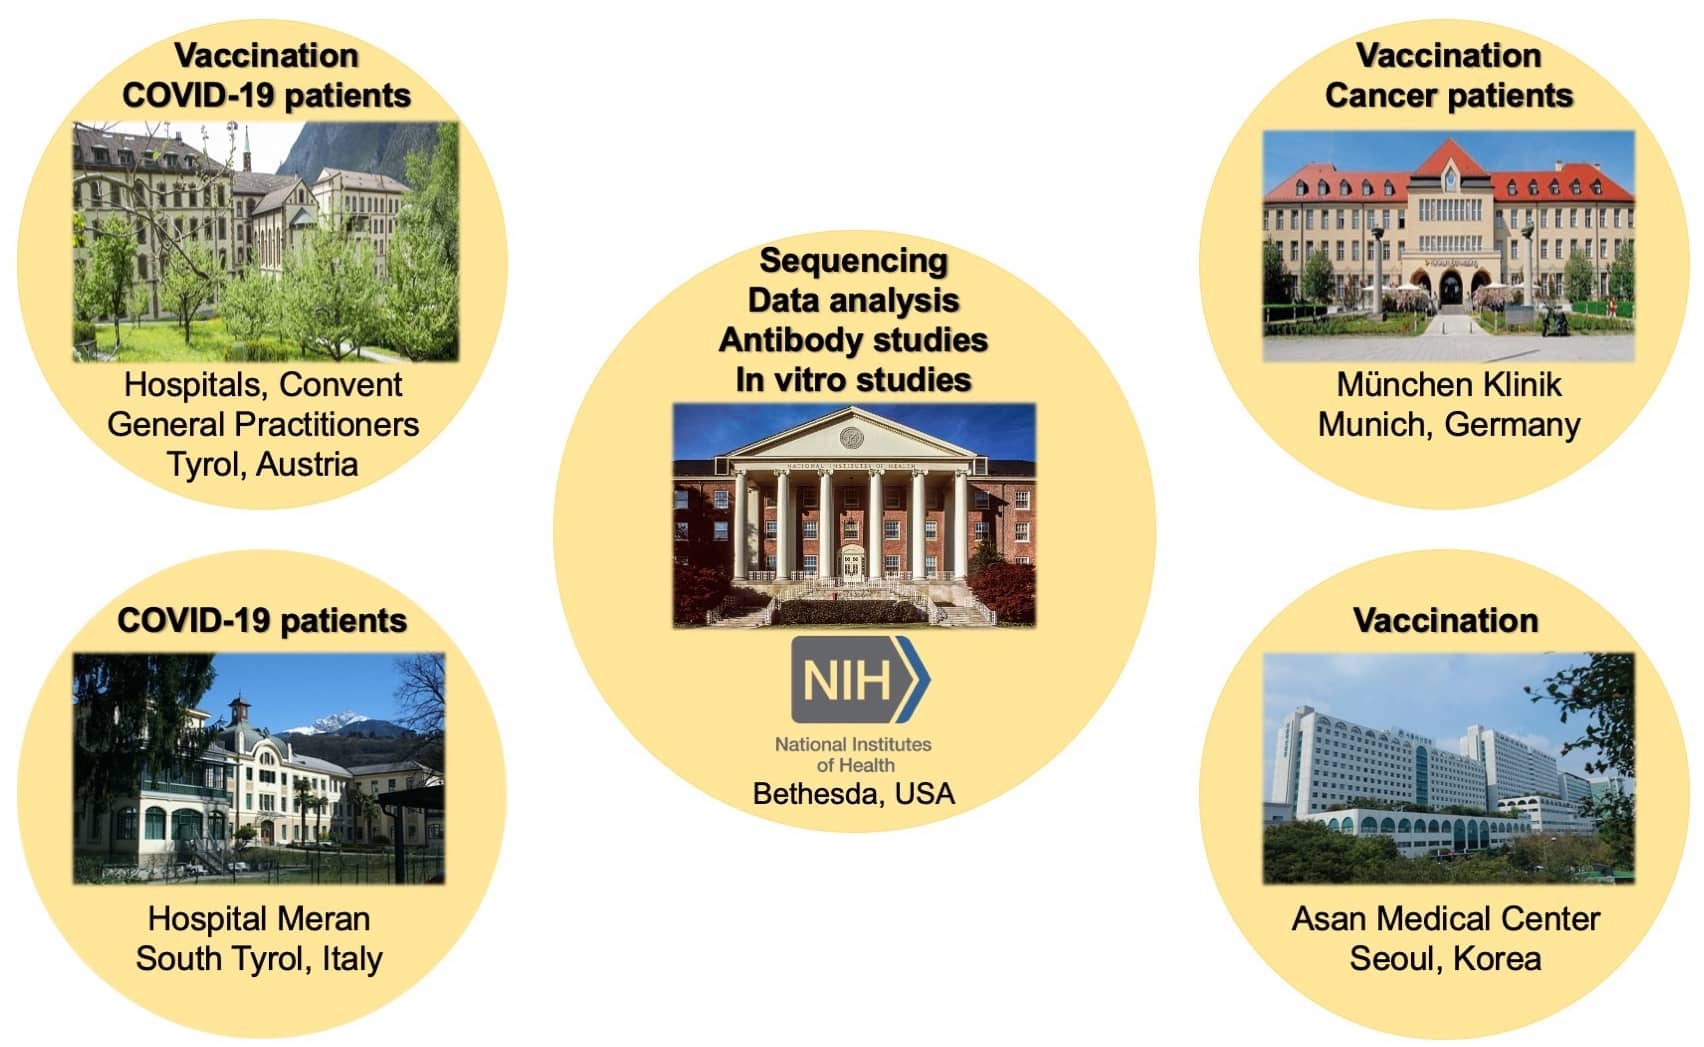 Medical research facilities in Austria, Italy, Germany, South Korea, and at the NIH.